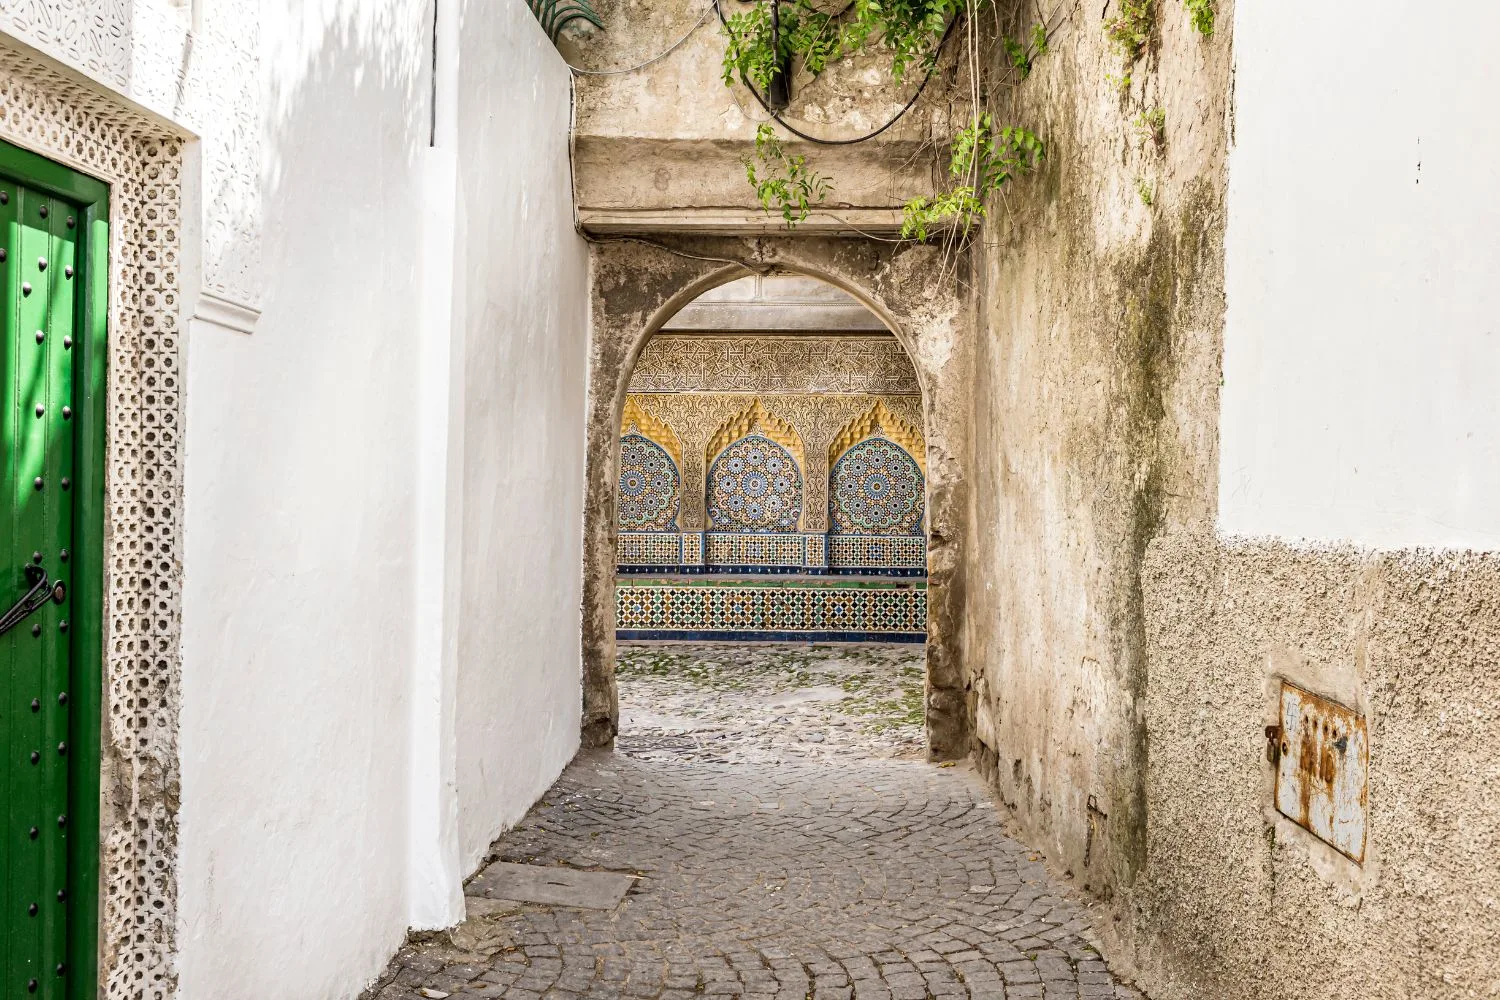 A narrow, quiet alley in the Kasbah of Tangier, Morocco